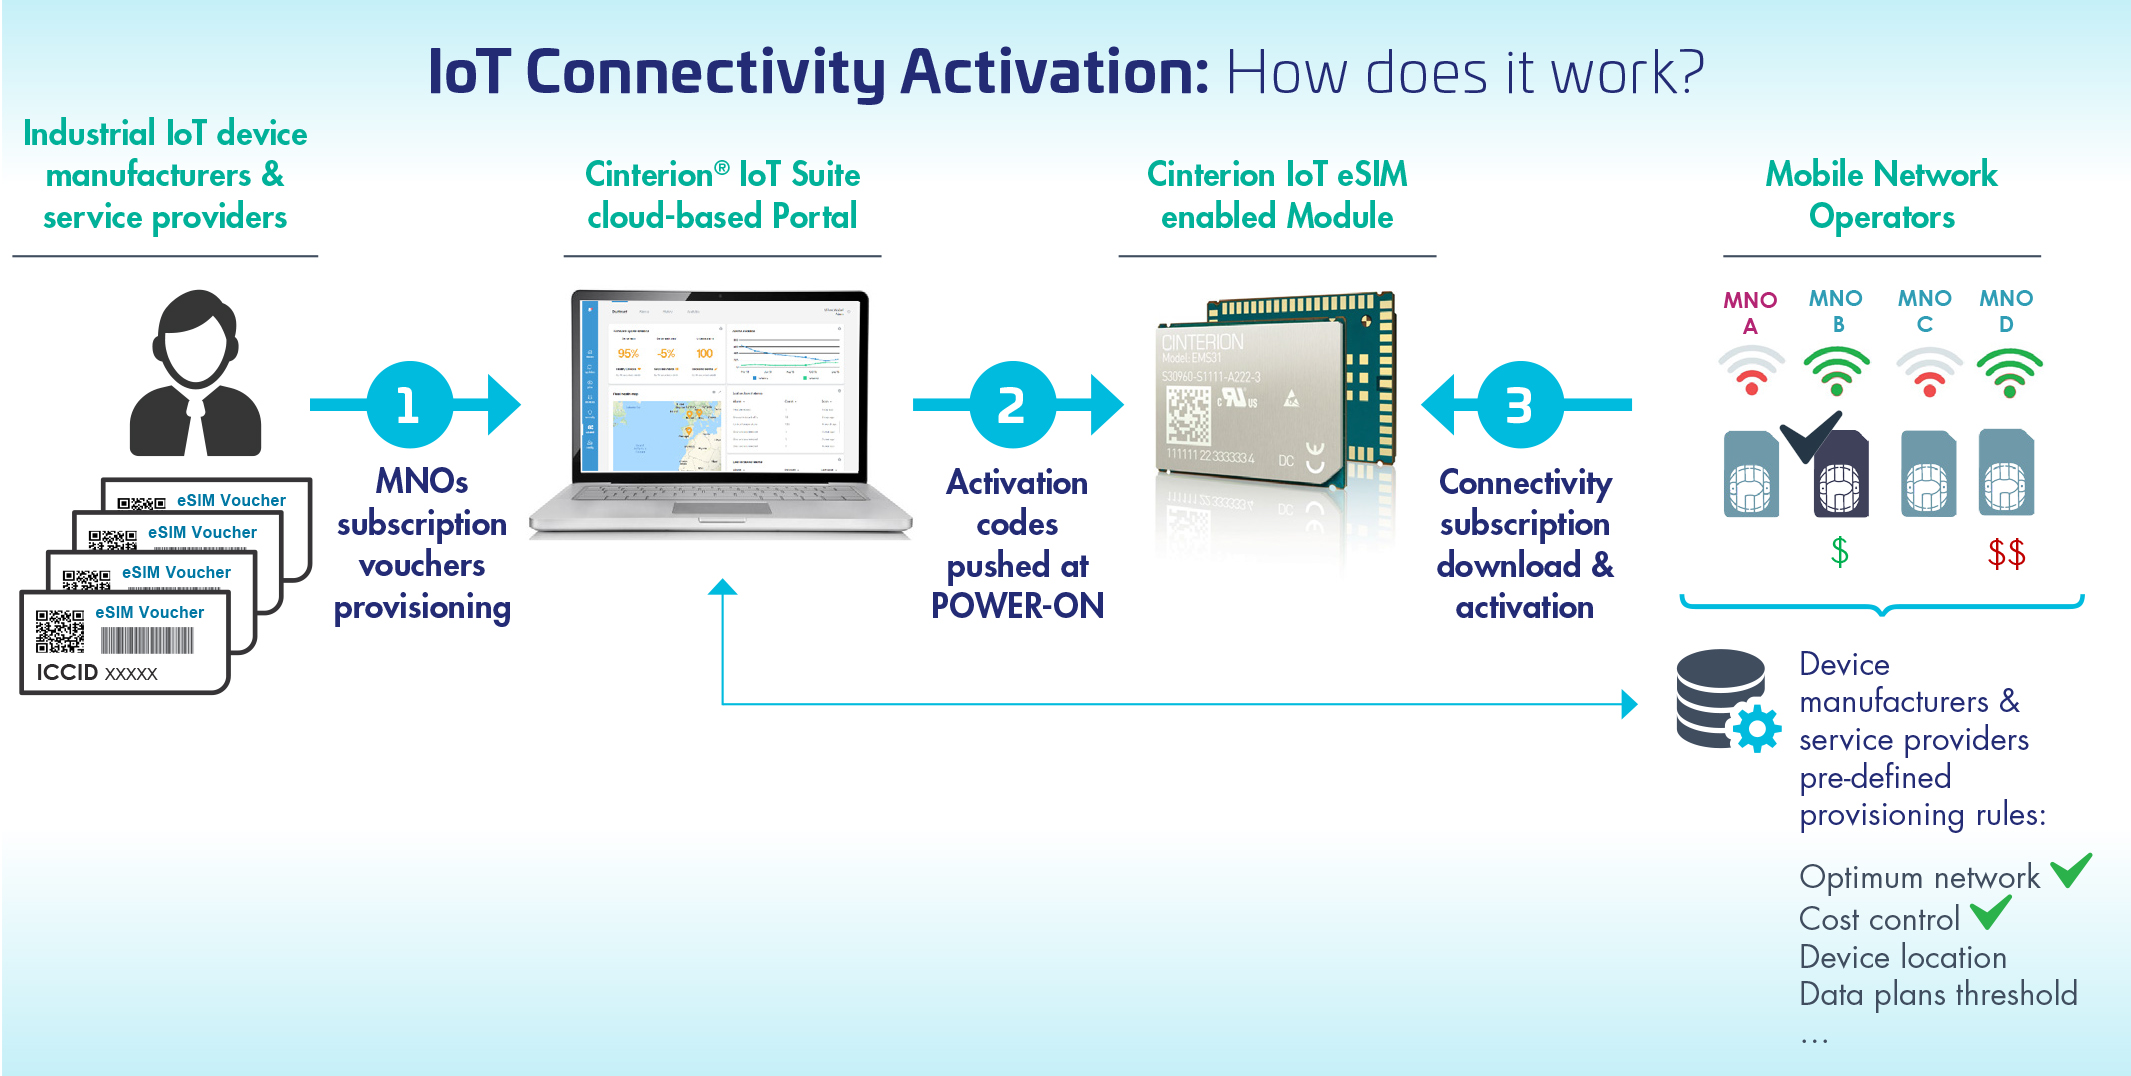 IoT Connectivity Activation